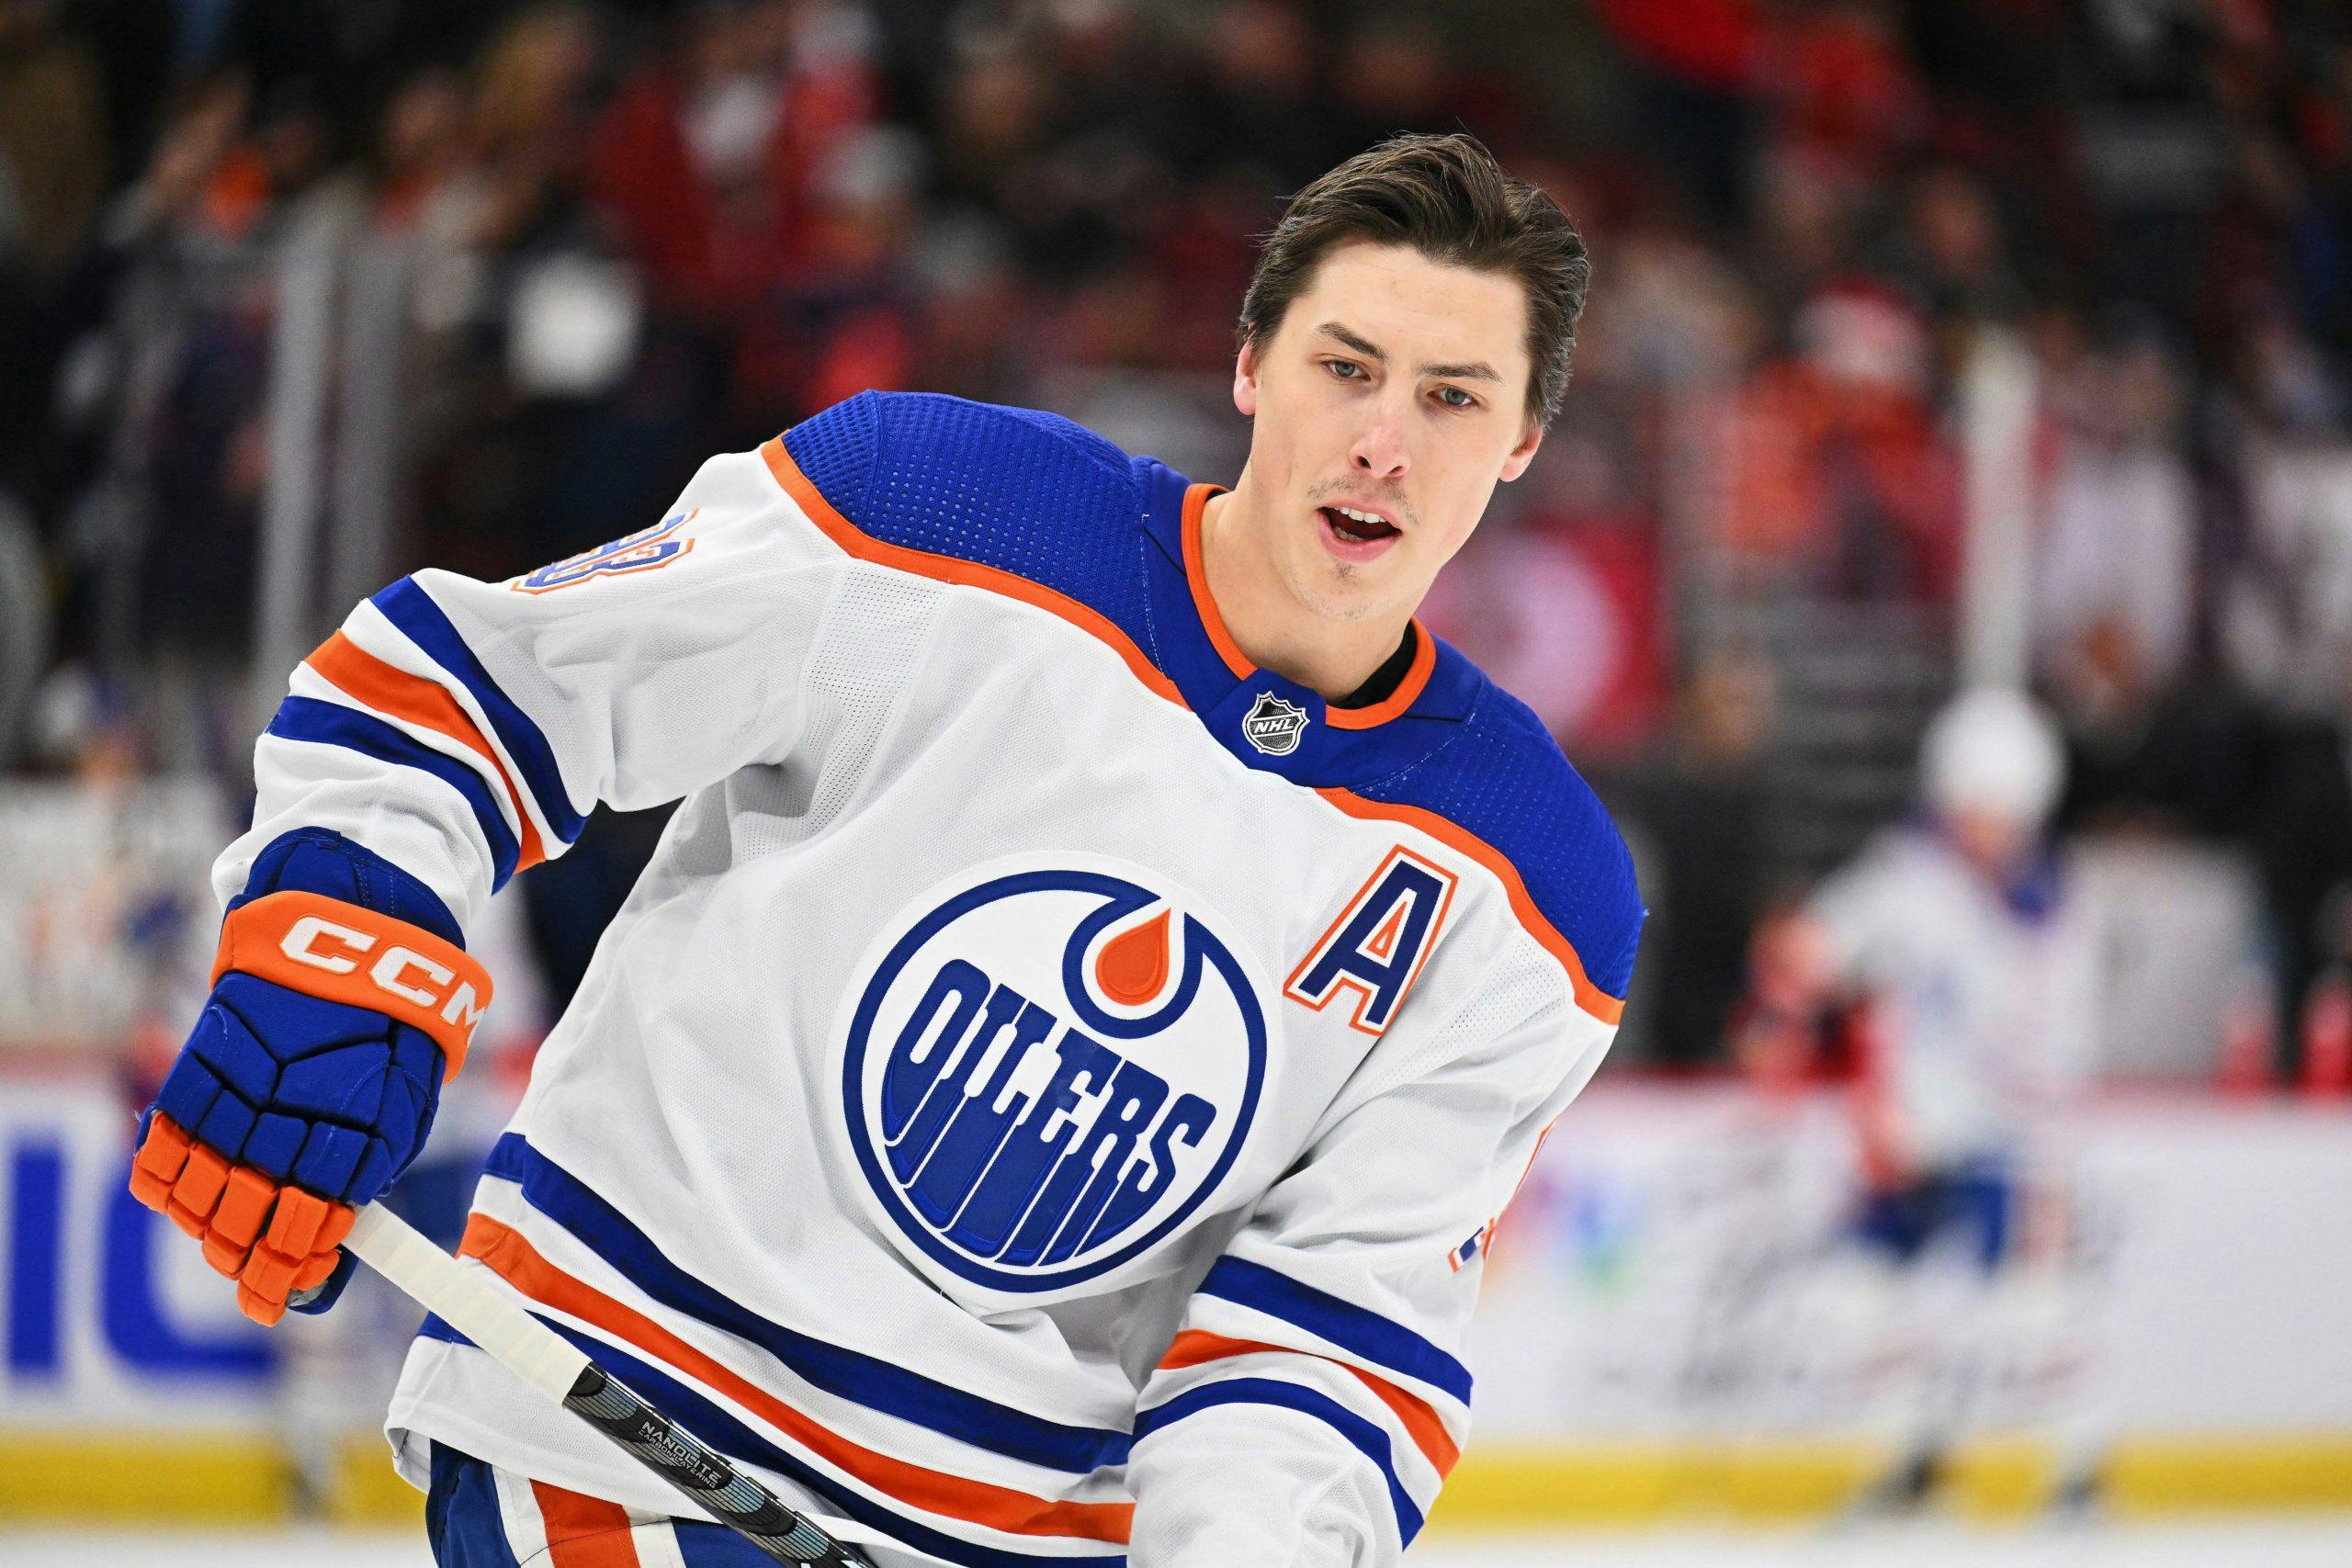 Nhl Star Ryan Nugent Hopkins Brother Adam Nugent: Who Is He?